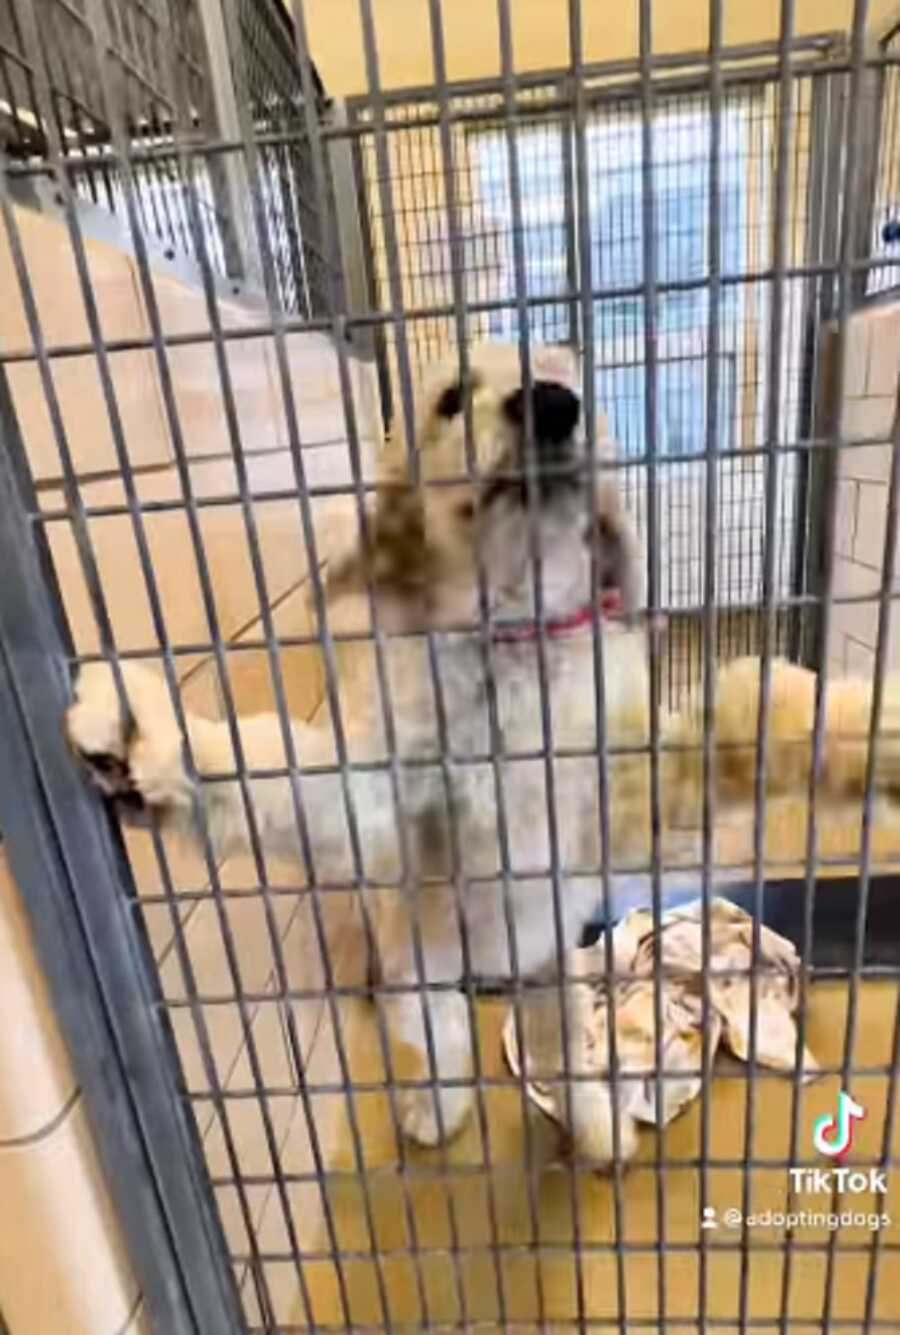 Shelter dog's excited reaction to adoption news.